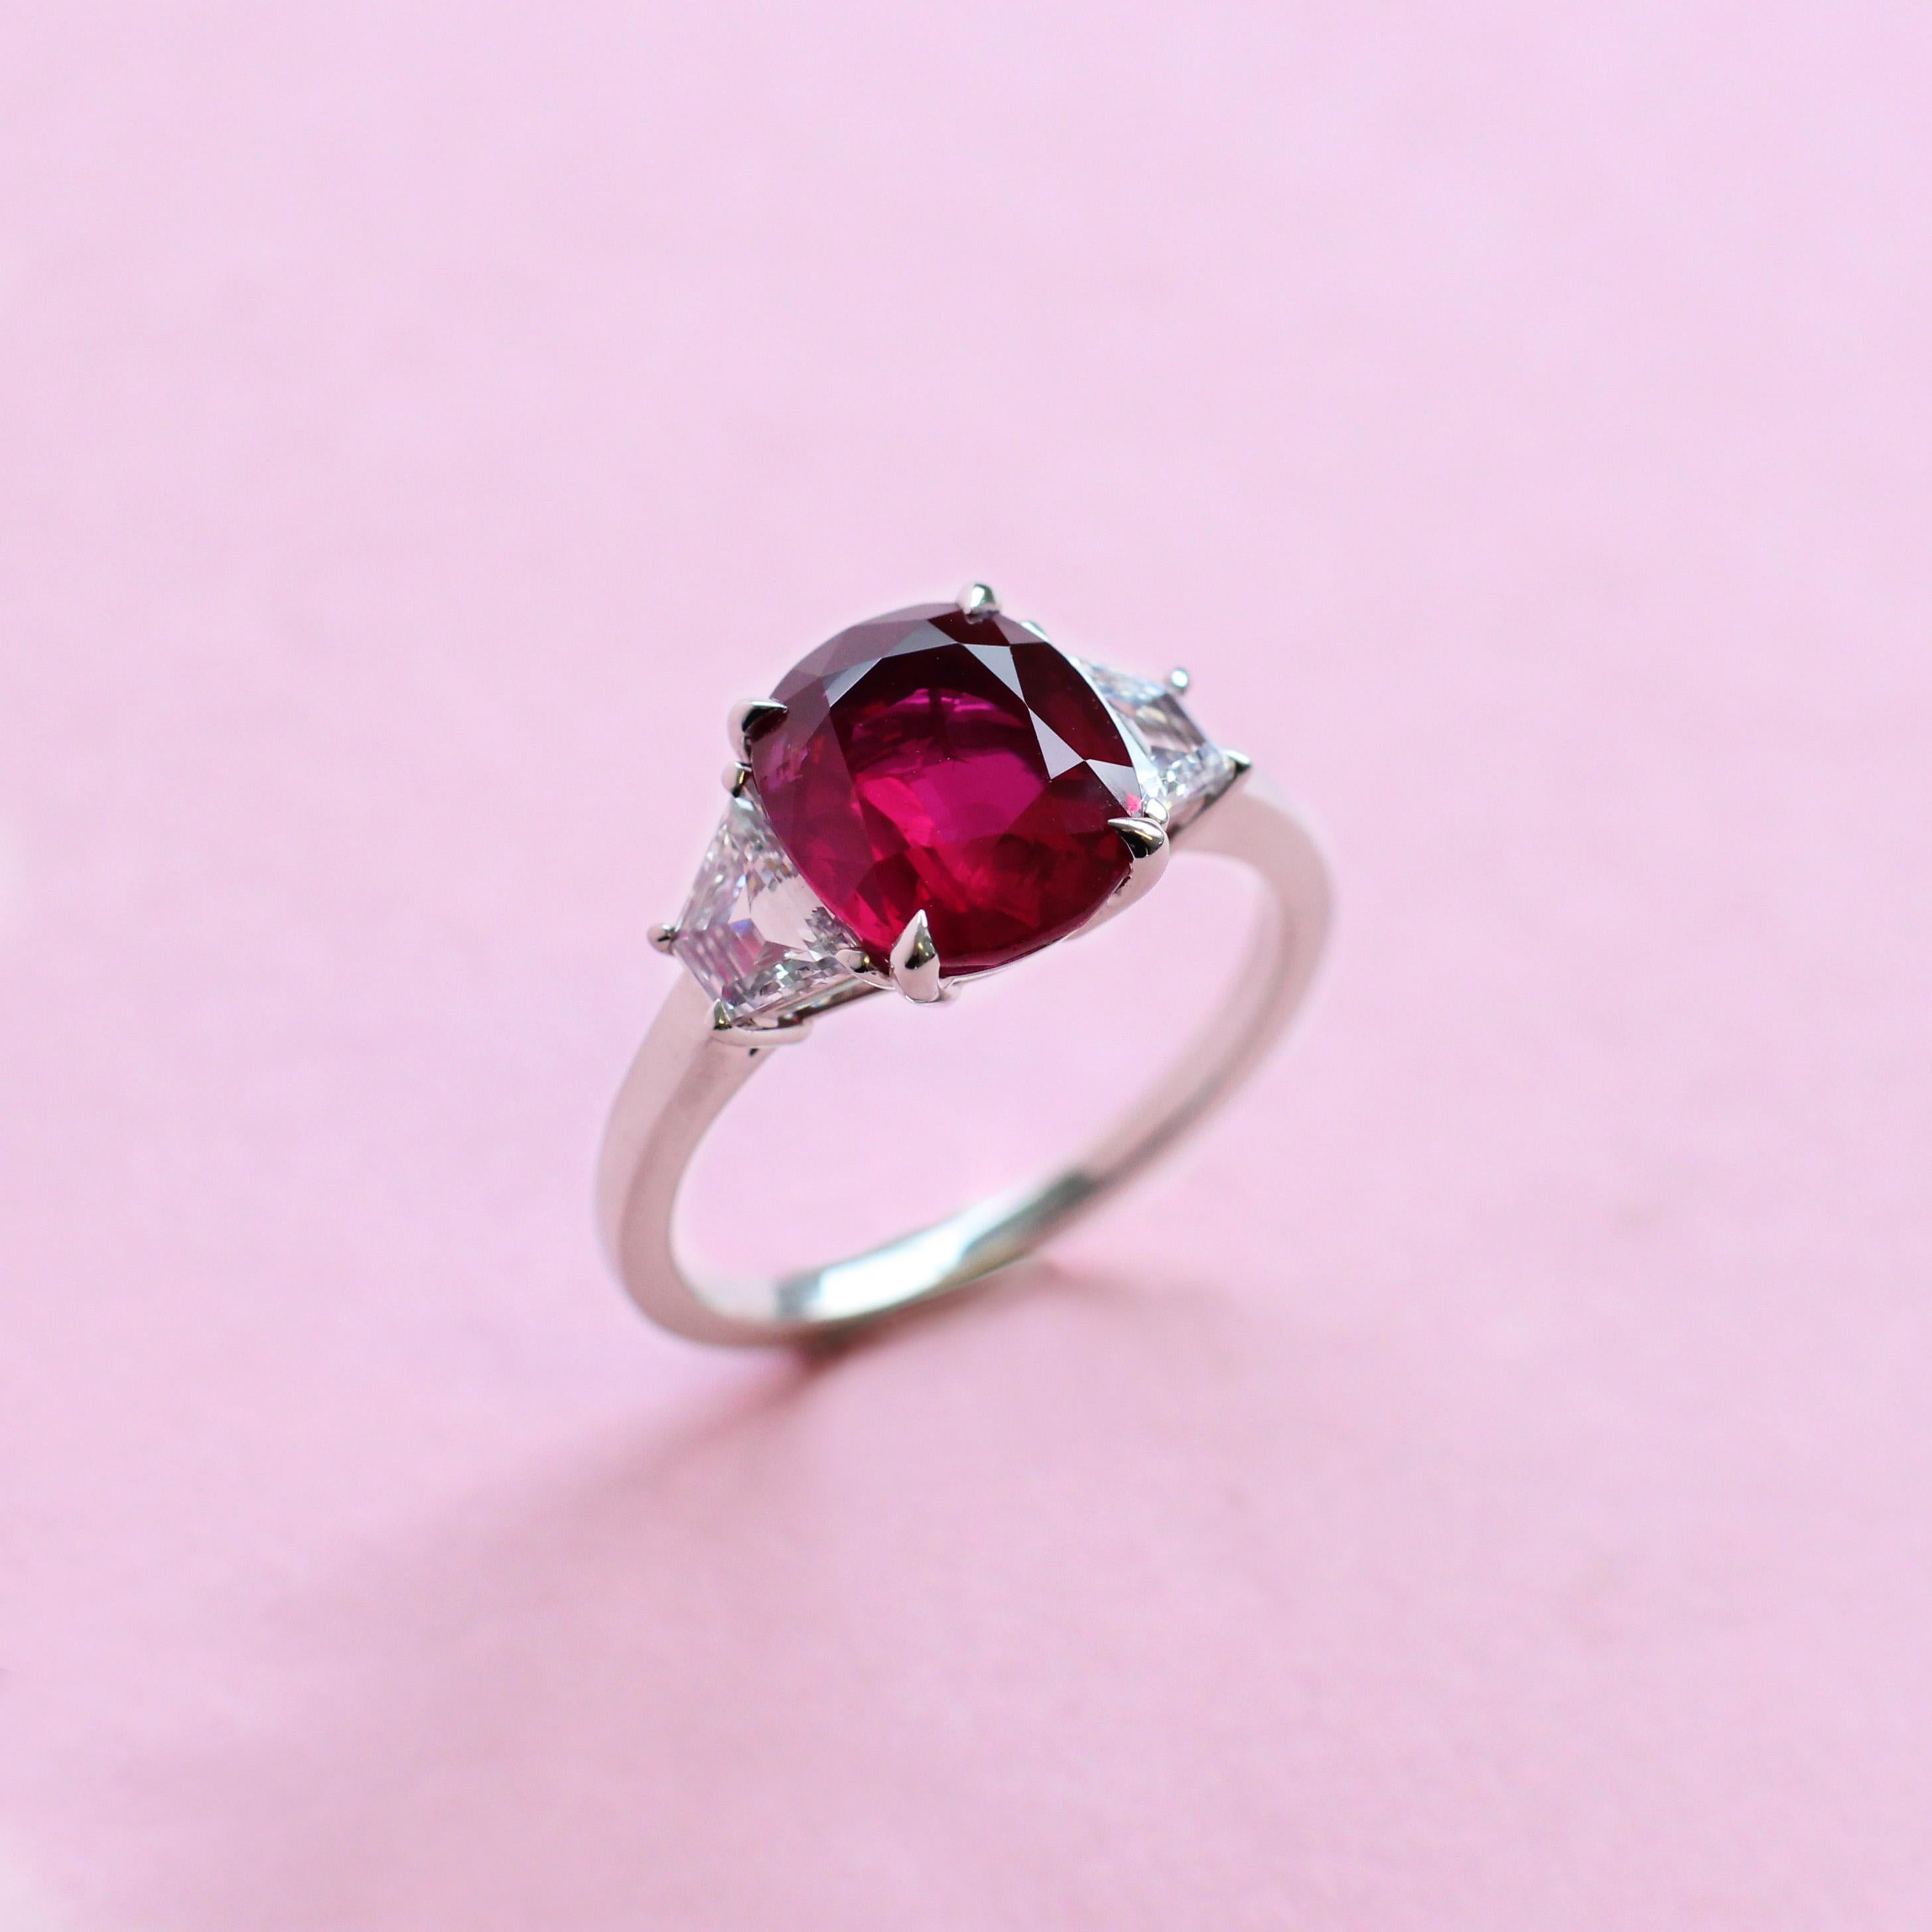 Women's or Men's 3.53 Carats Vivid Red Ruby Trilogy Ring with White Diamond Detail For Sale